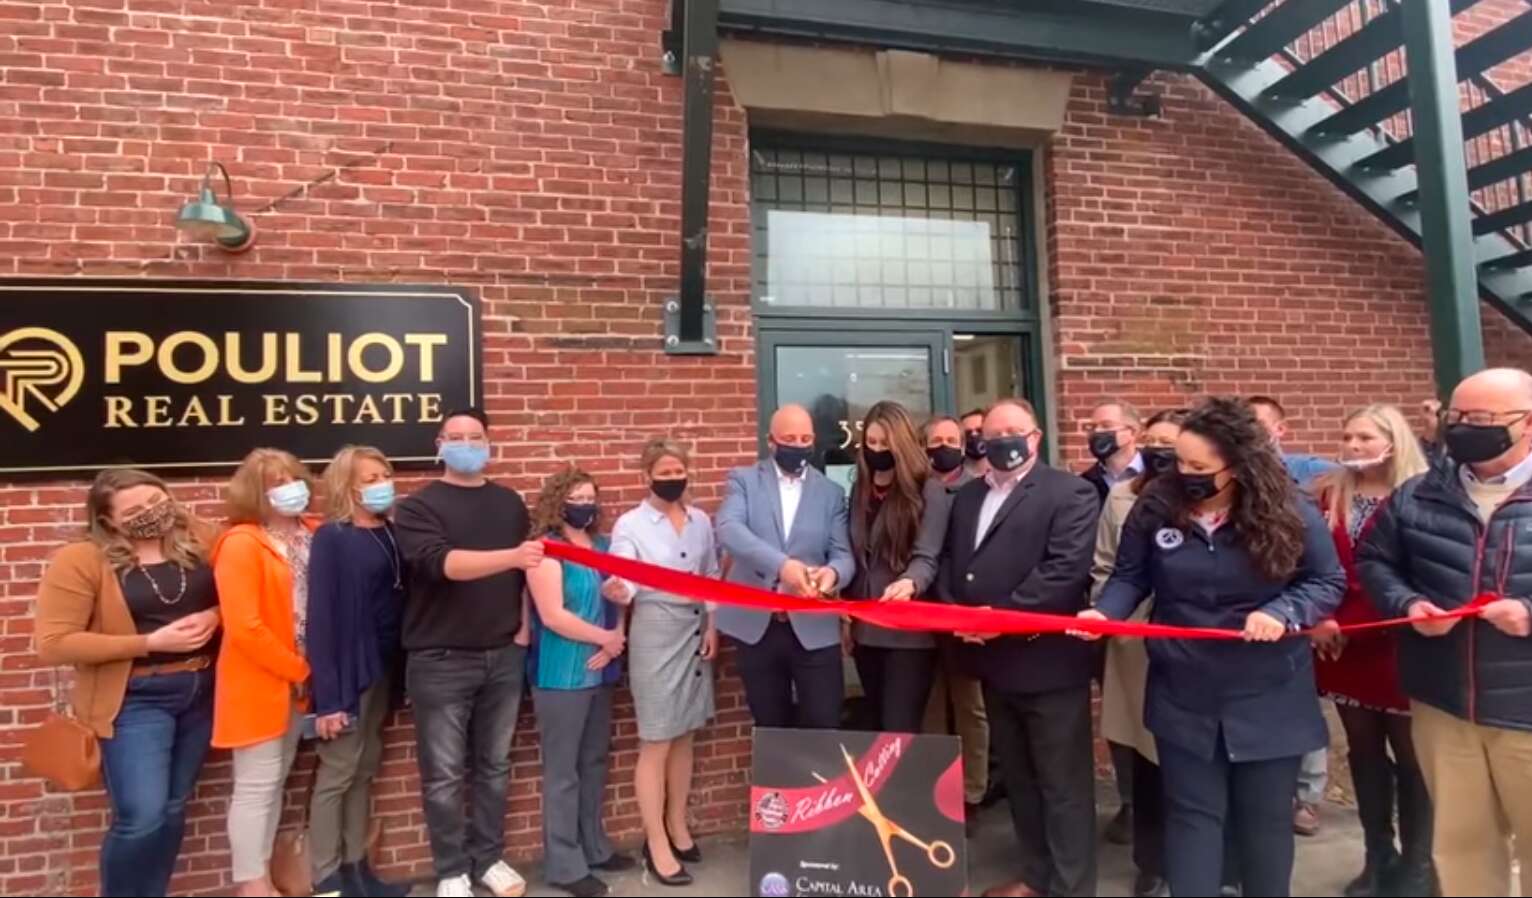 a man, white in a gray suit, cuts a thick red ribbon with giant scissors as a group of poeple stands around him behind them is a brick wall with a sign that says pouliot real estate